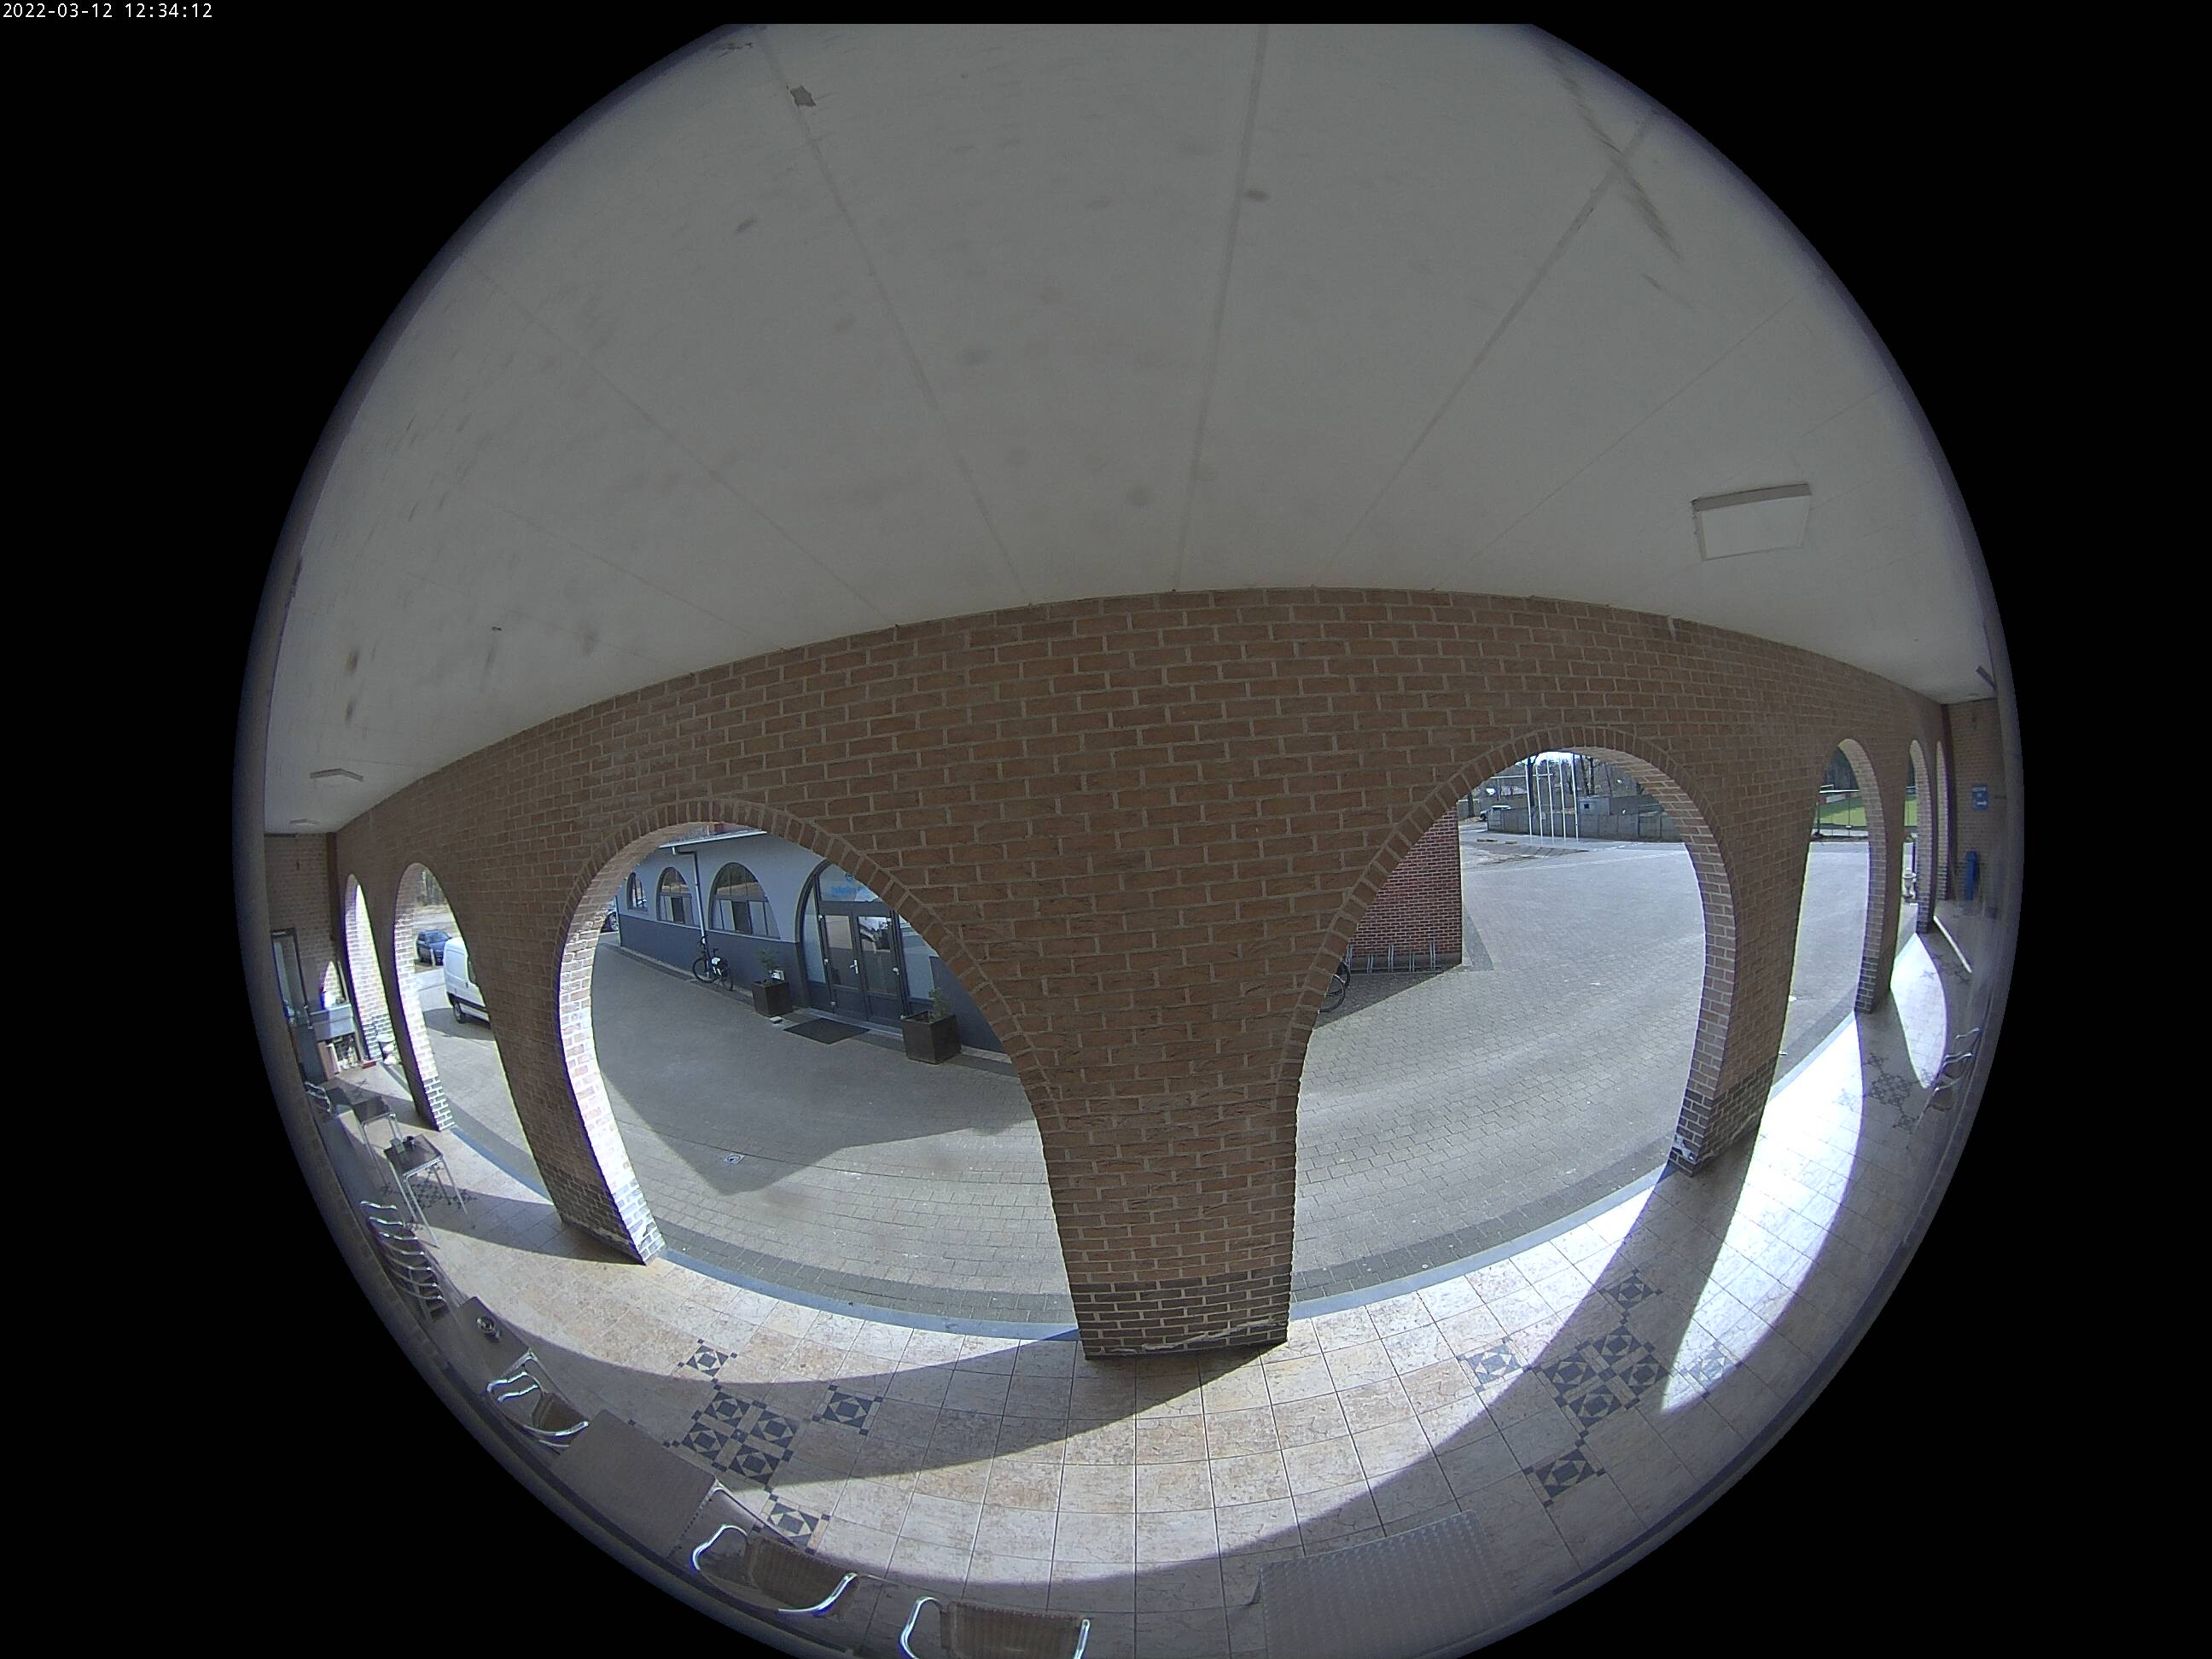 preview: IP camera - Brussels